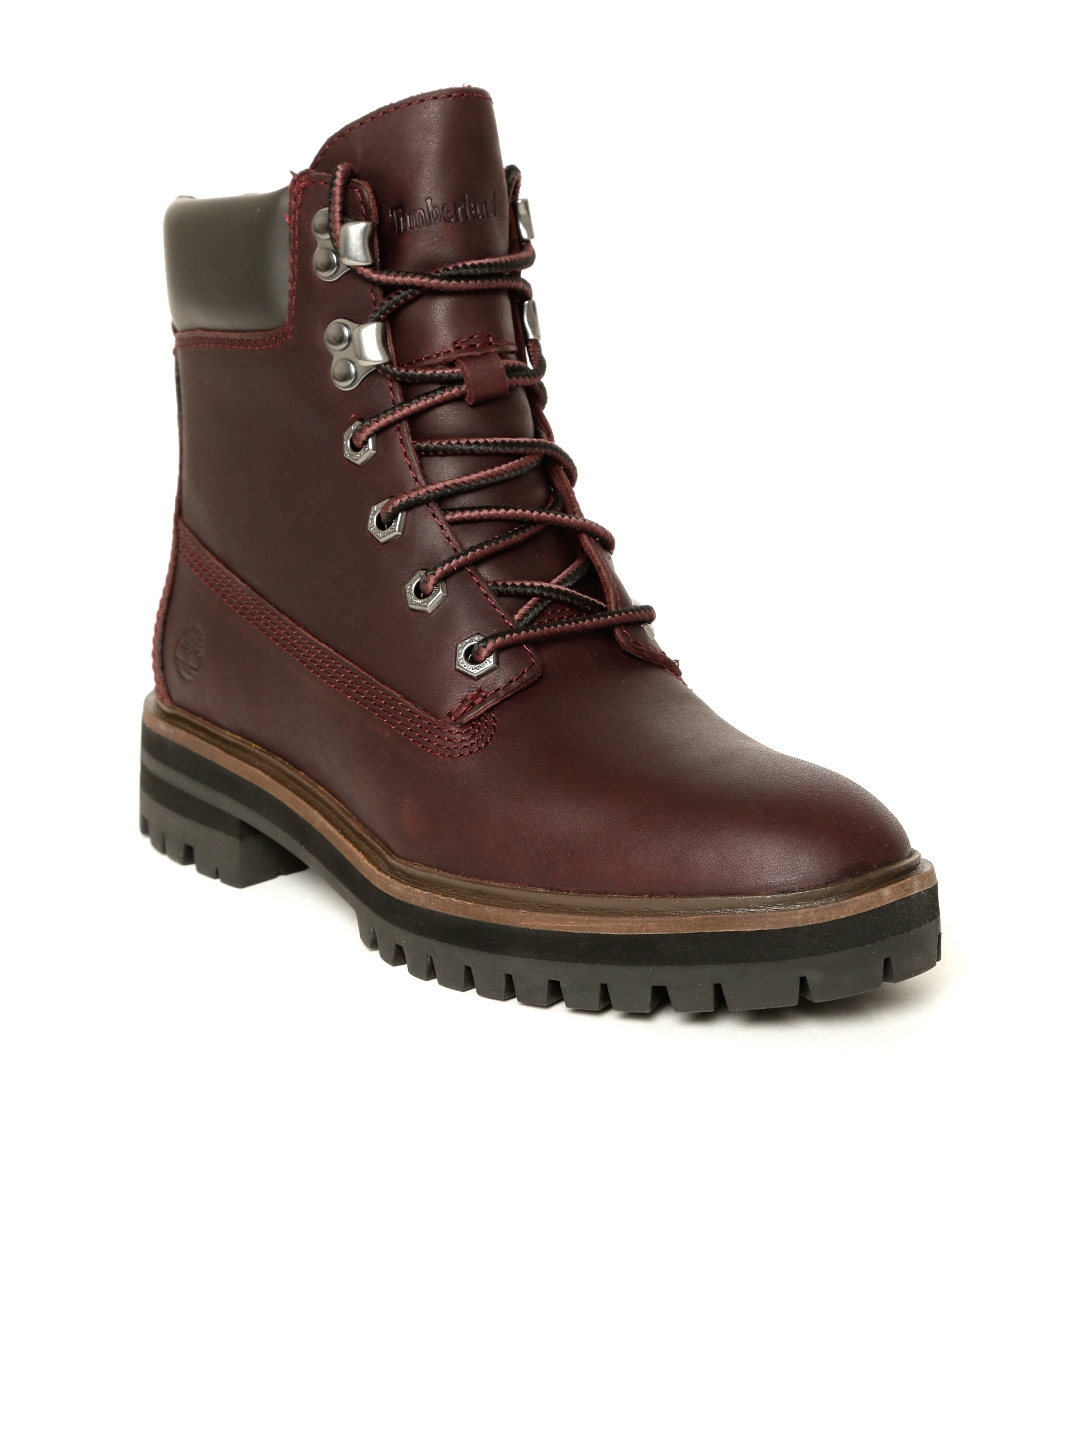 Buy Women Burgundy London Square 6 Inch Leather Mid Top Flat Boots - Boots for Women 9161613 | Myntra